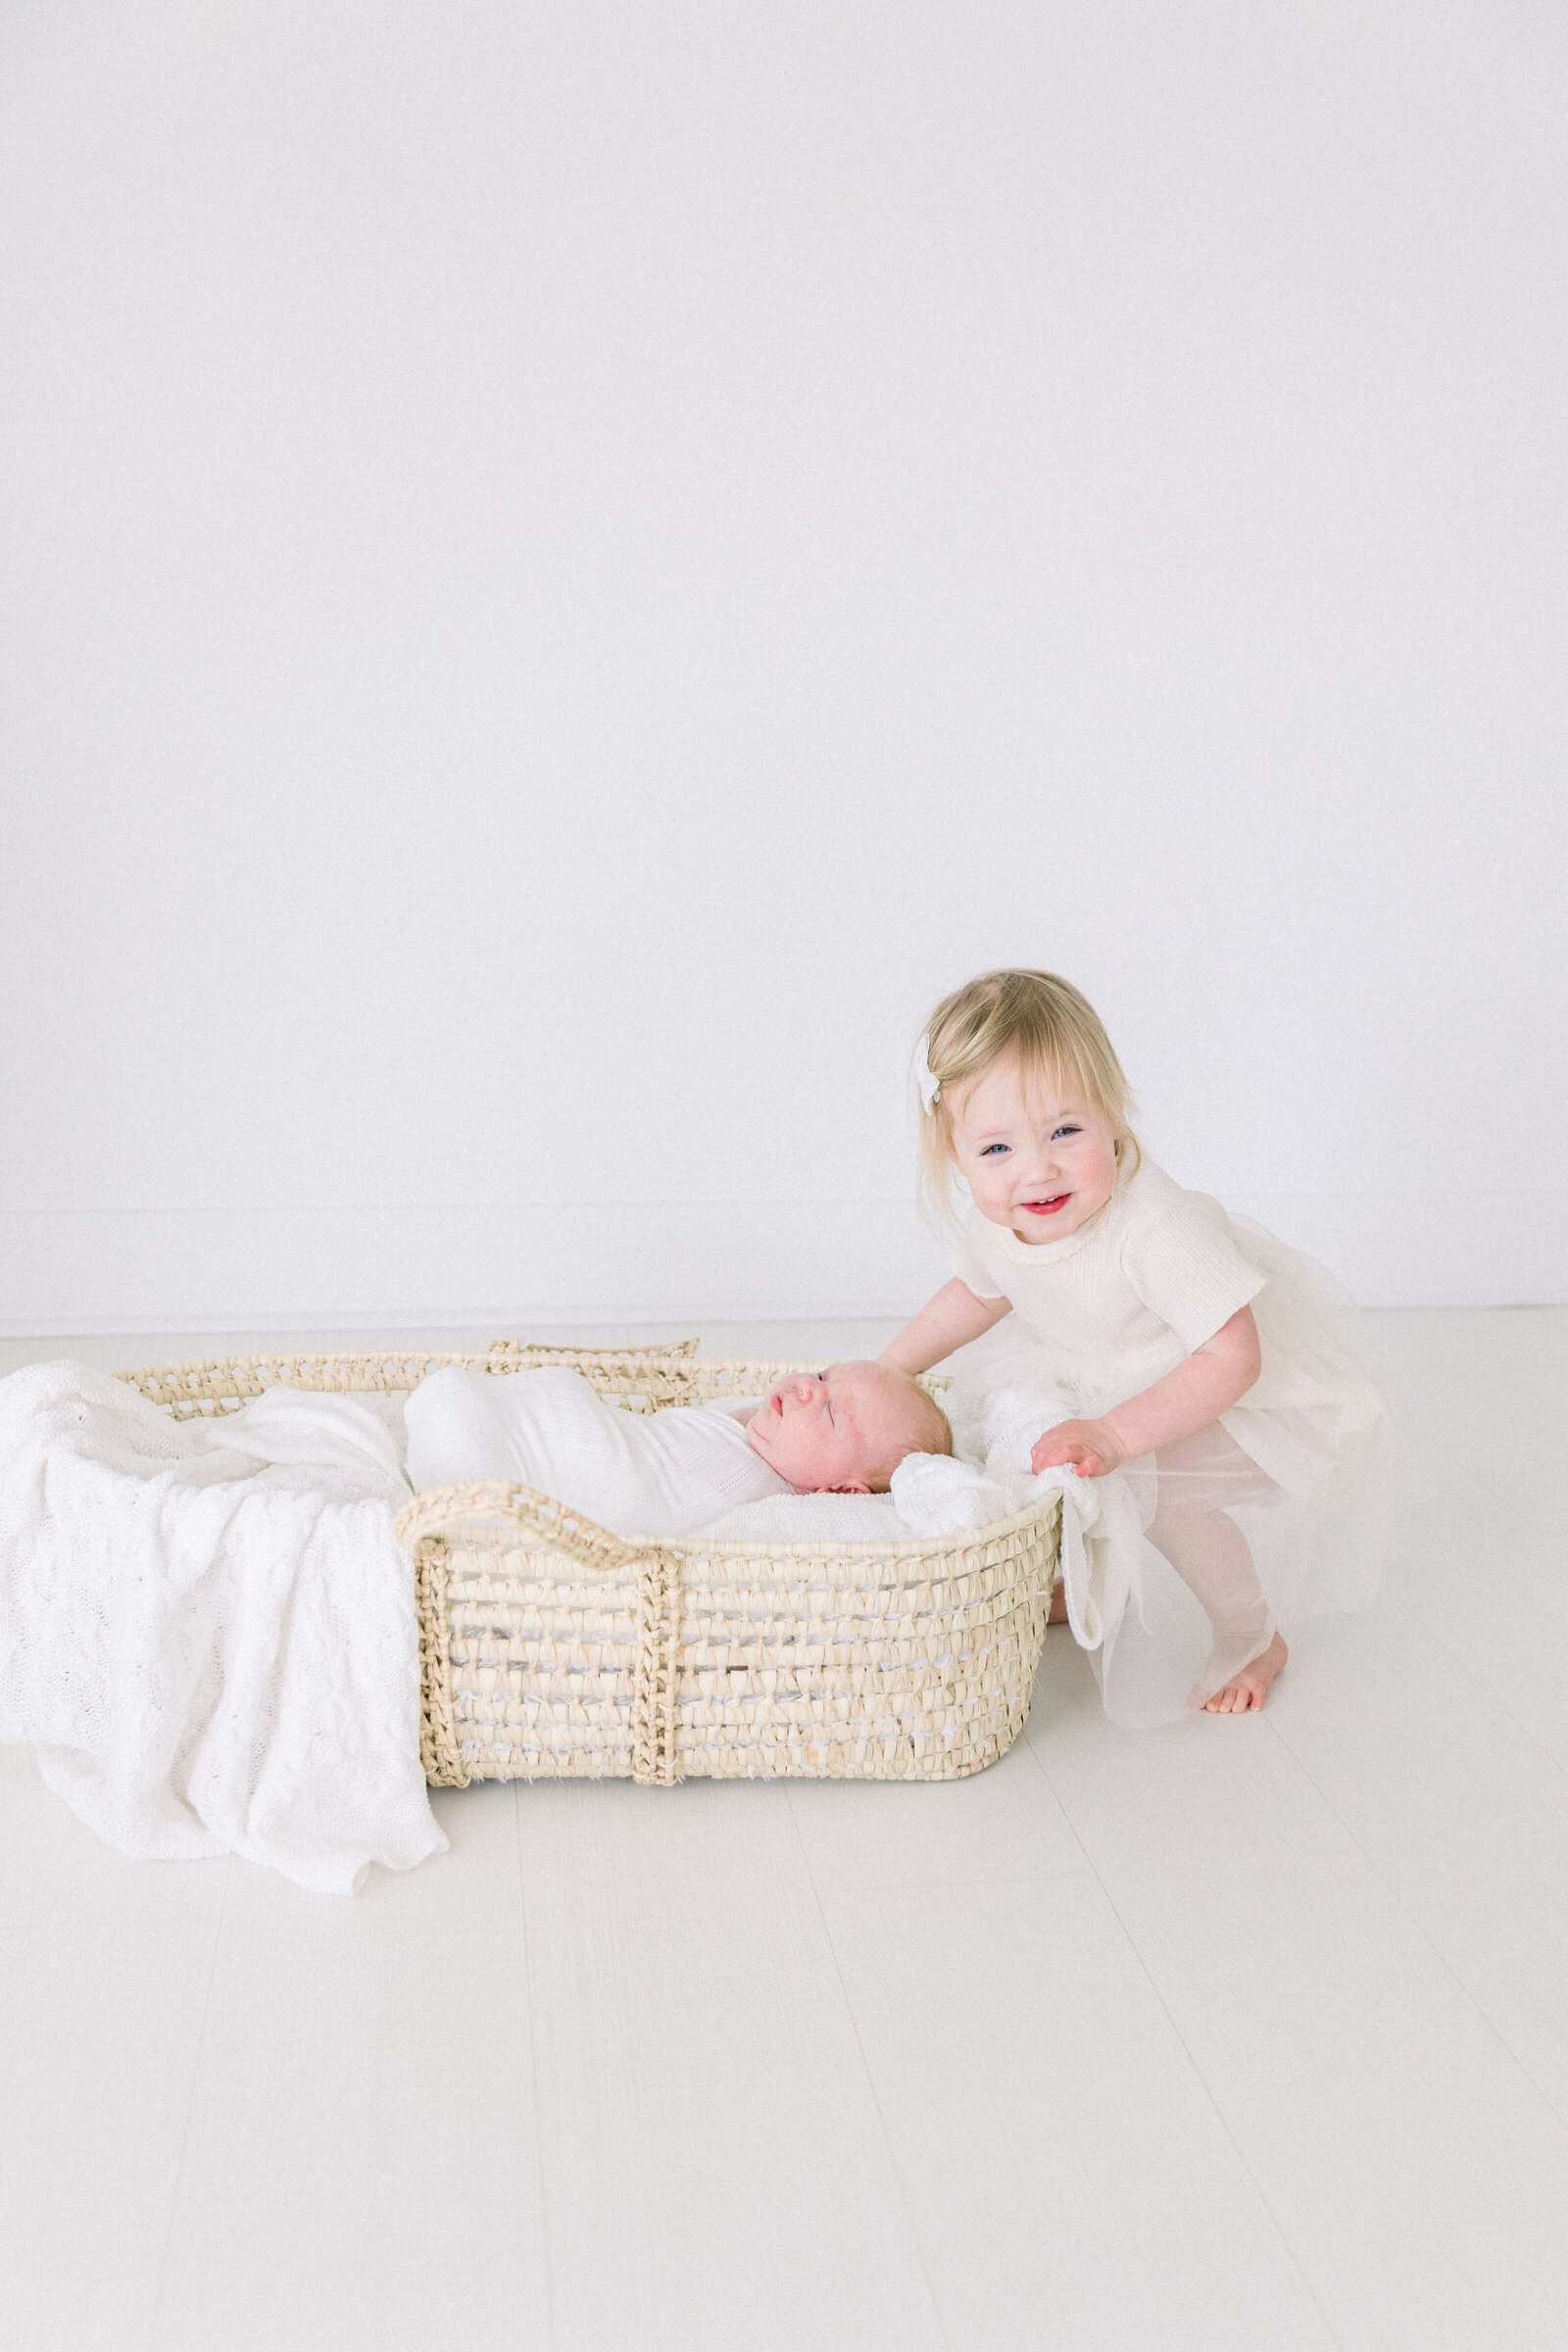 Older sister looking of baby brother in basket in studio taken by Family Photographer Sacramento Kelsey Krall